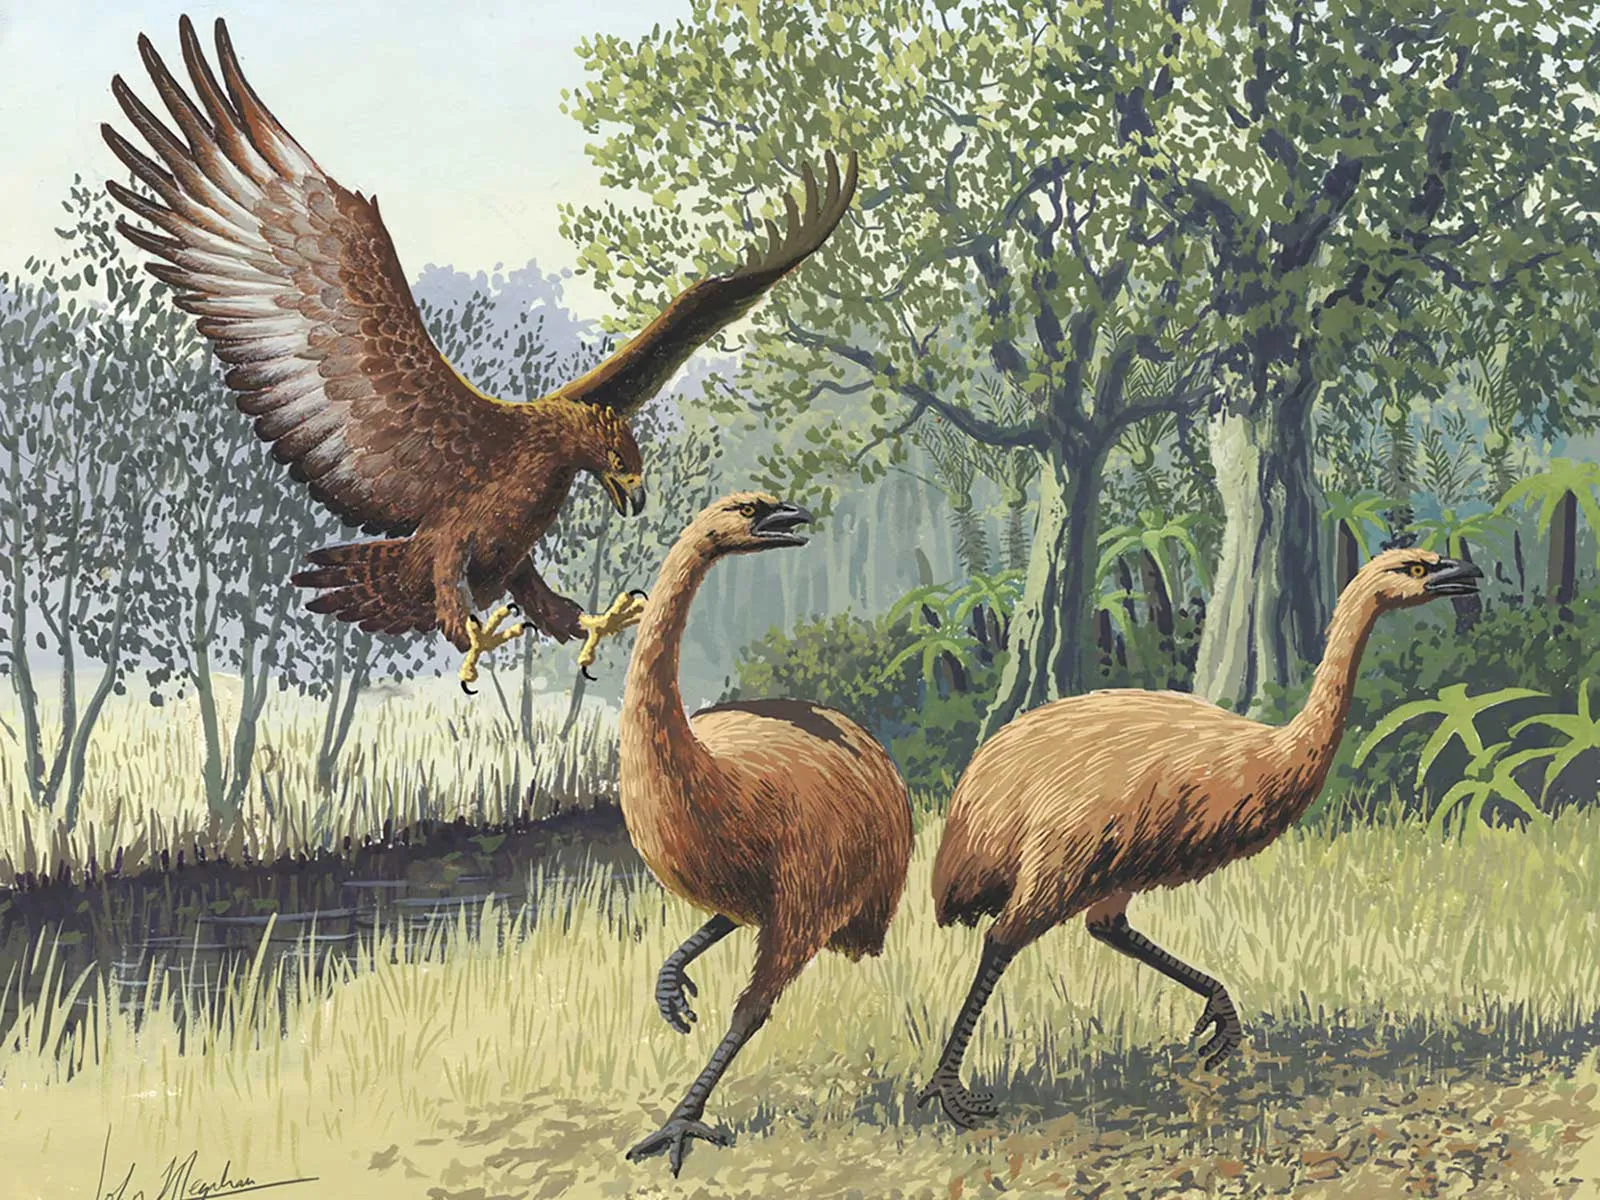 How a Giant Eagle Once Came to Dominate New Zealand | Science| Smithsonian  Magazine